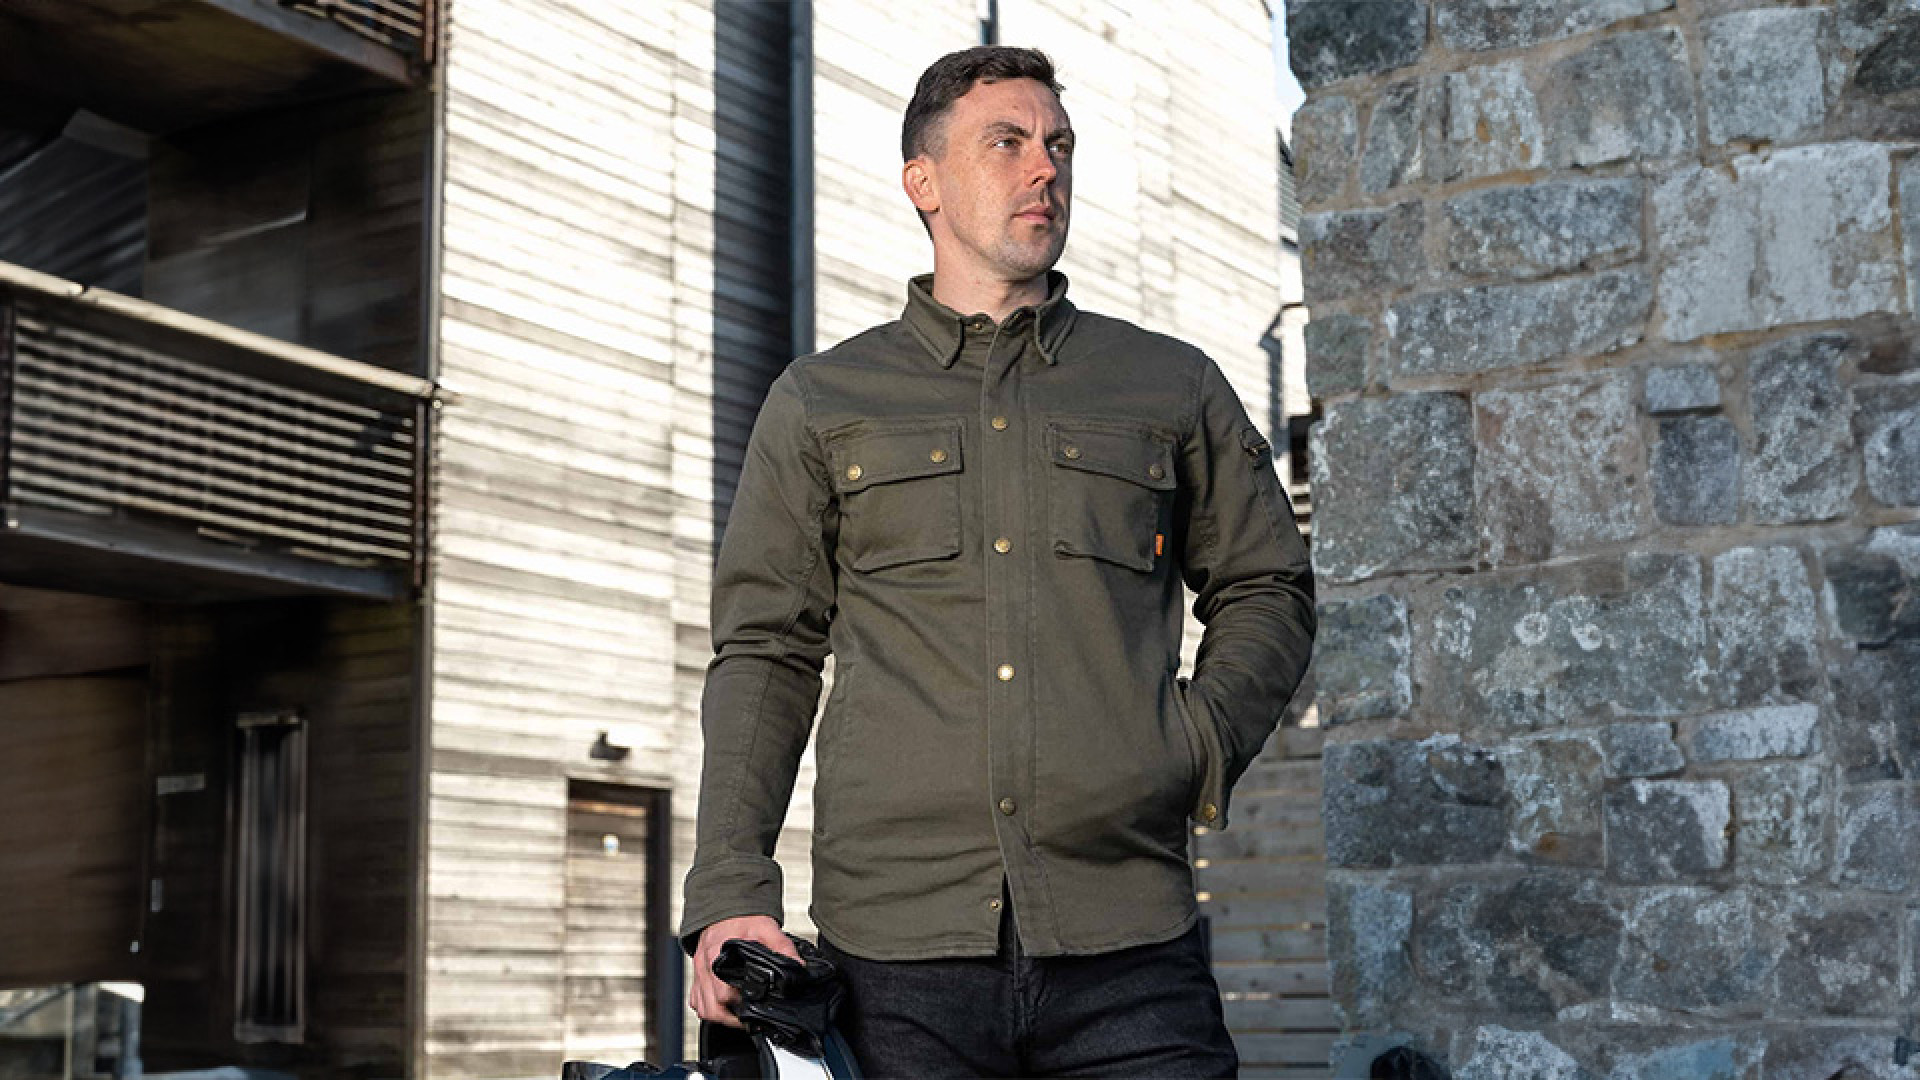 https://www.raceleathers.co.uk/image/cache/catalog/Blog%20Images/Merlin%20Brody%20Riding%20Shirt%20Review-1920x1080.jpg